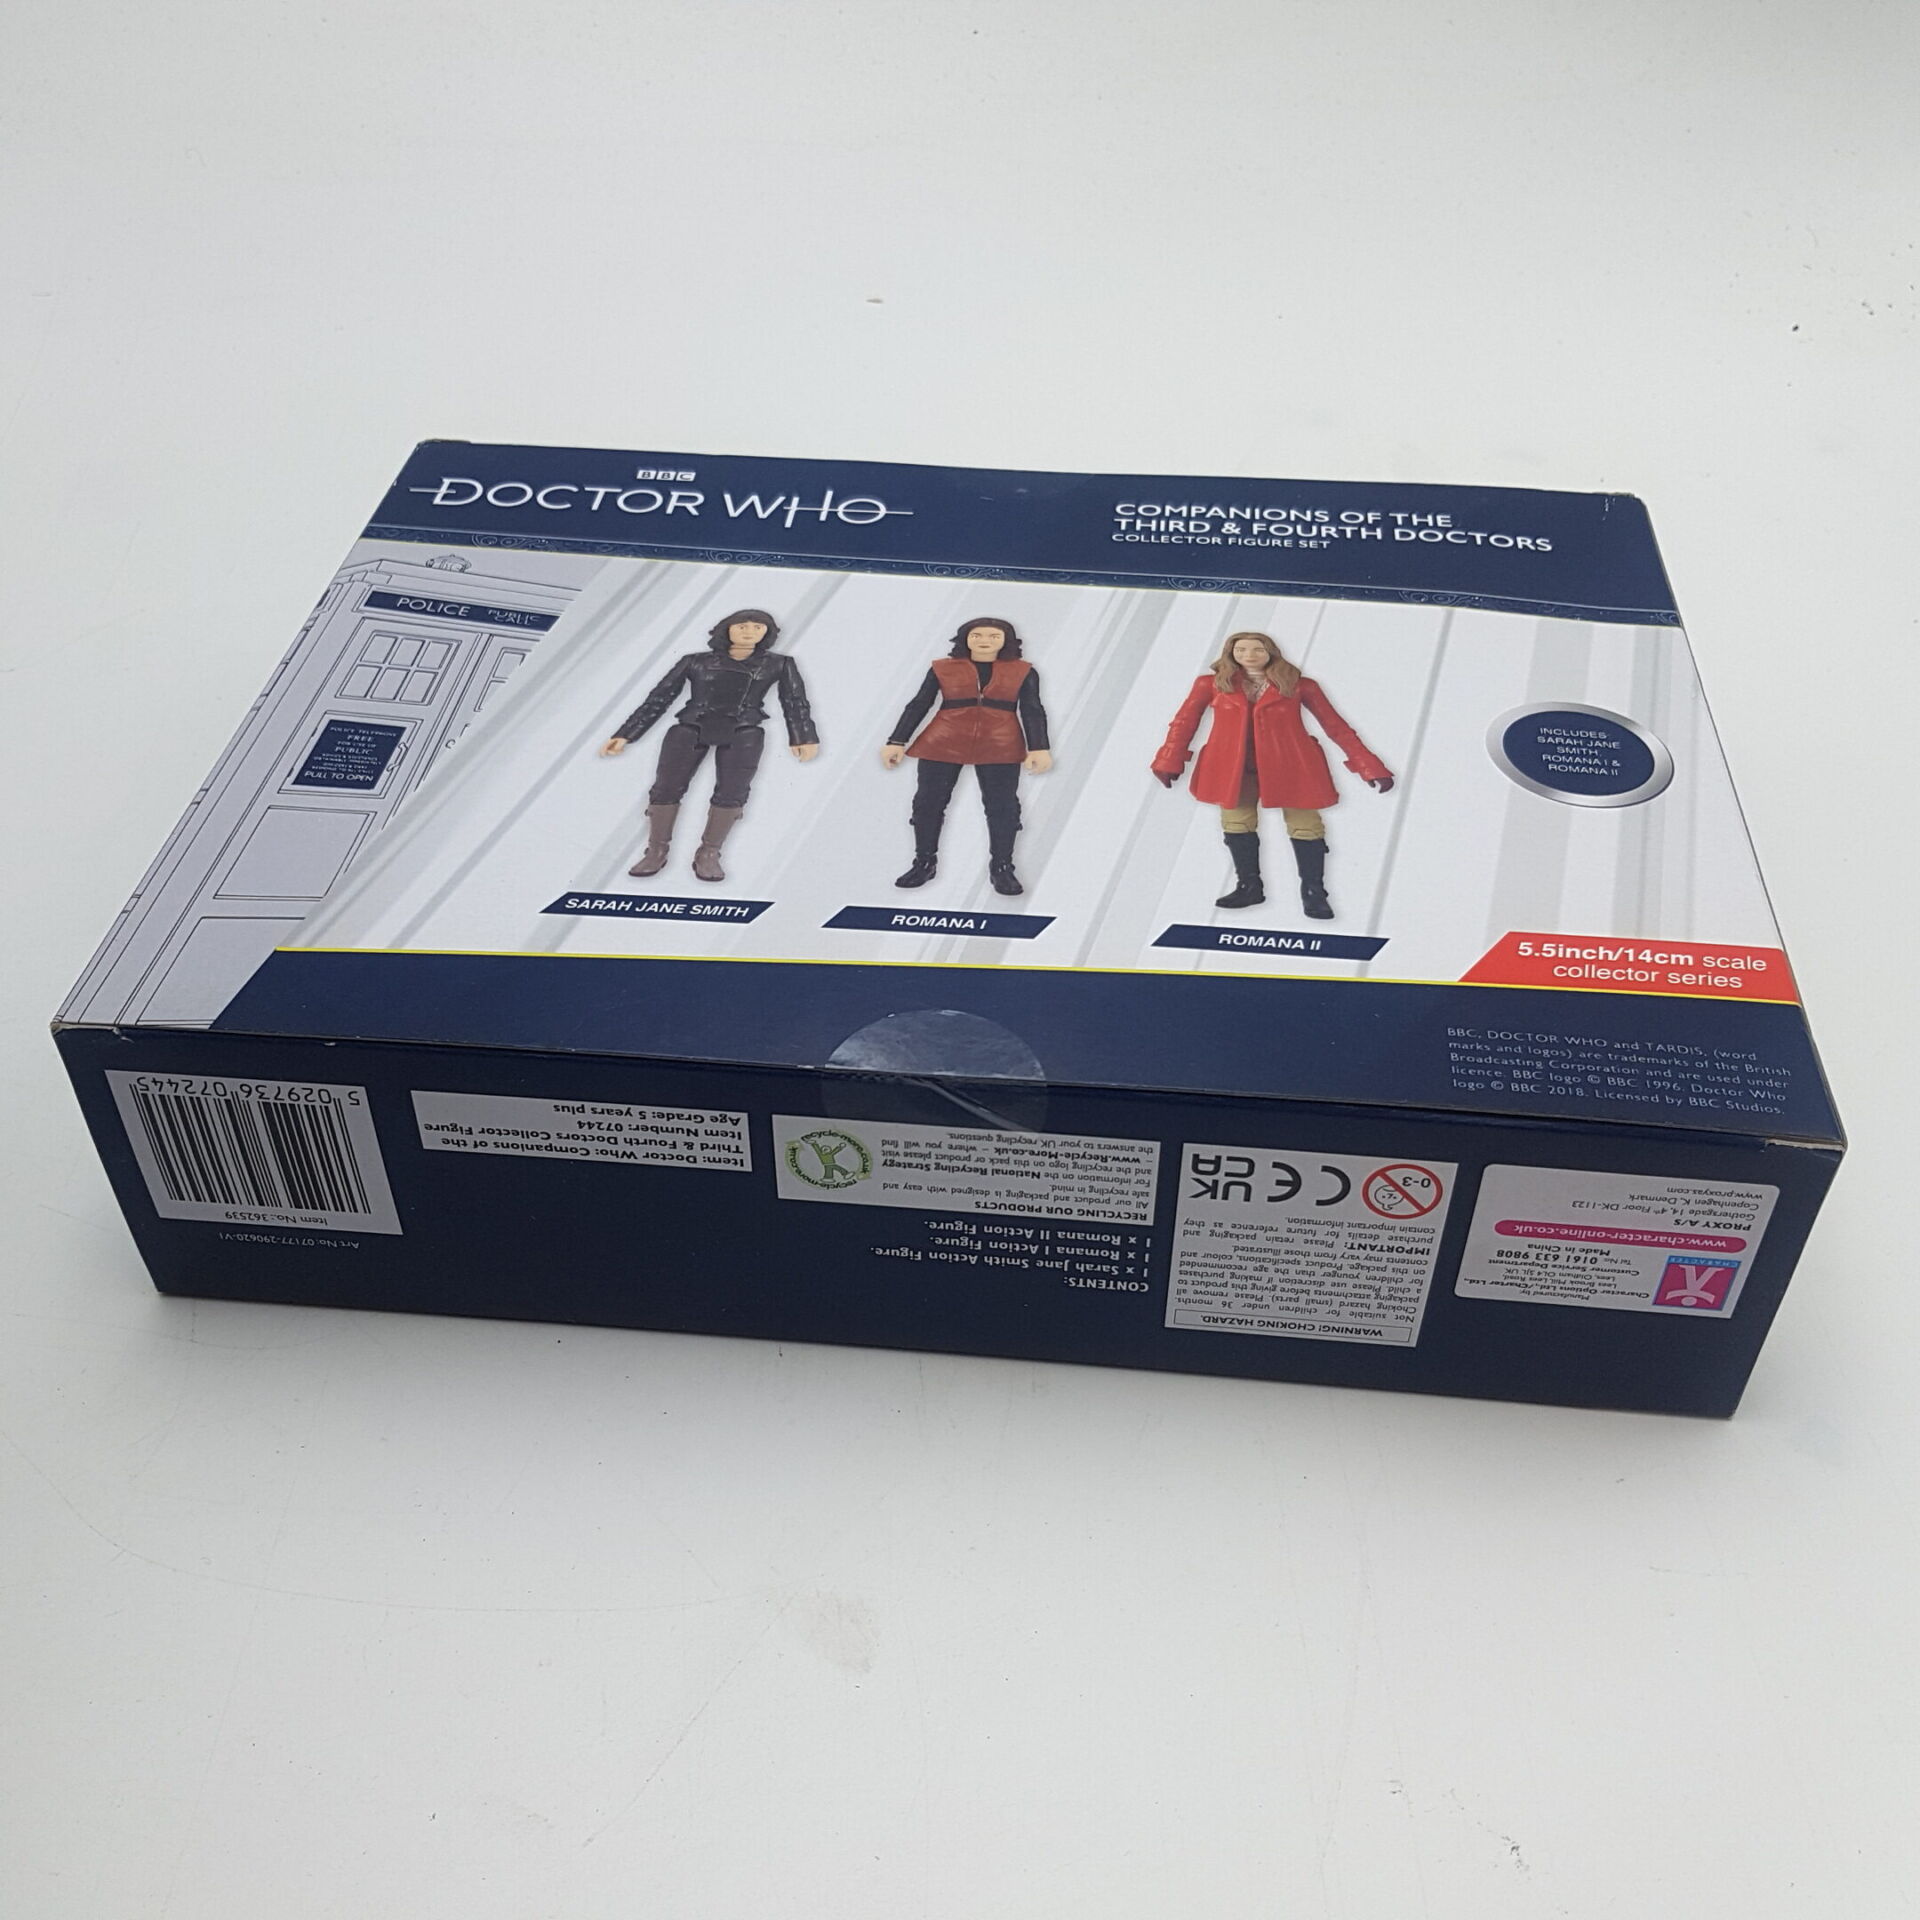 Doctor Who Companions of the Third and Fourth Doctors Collector Figure Set for sale online 